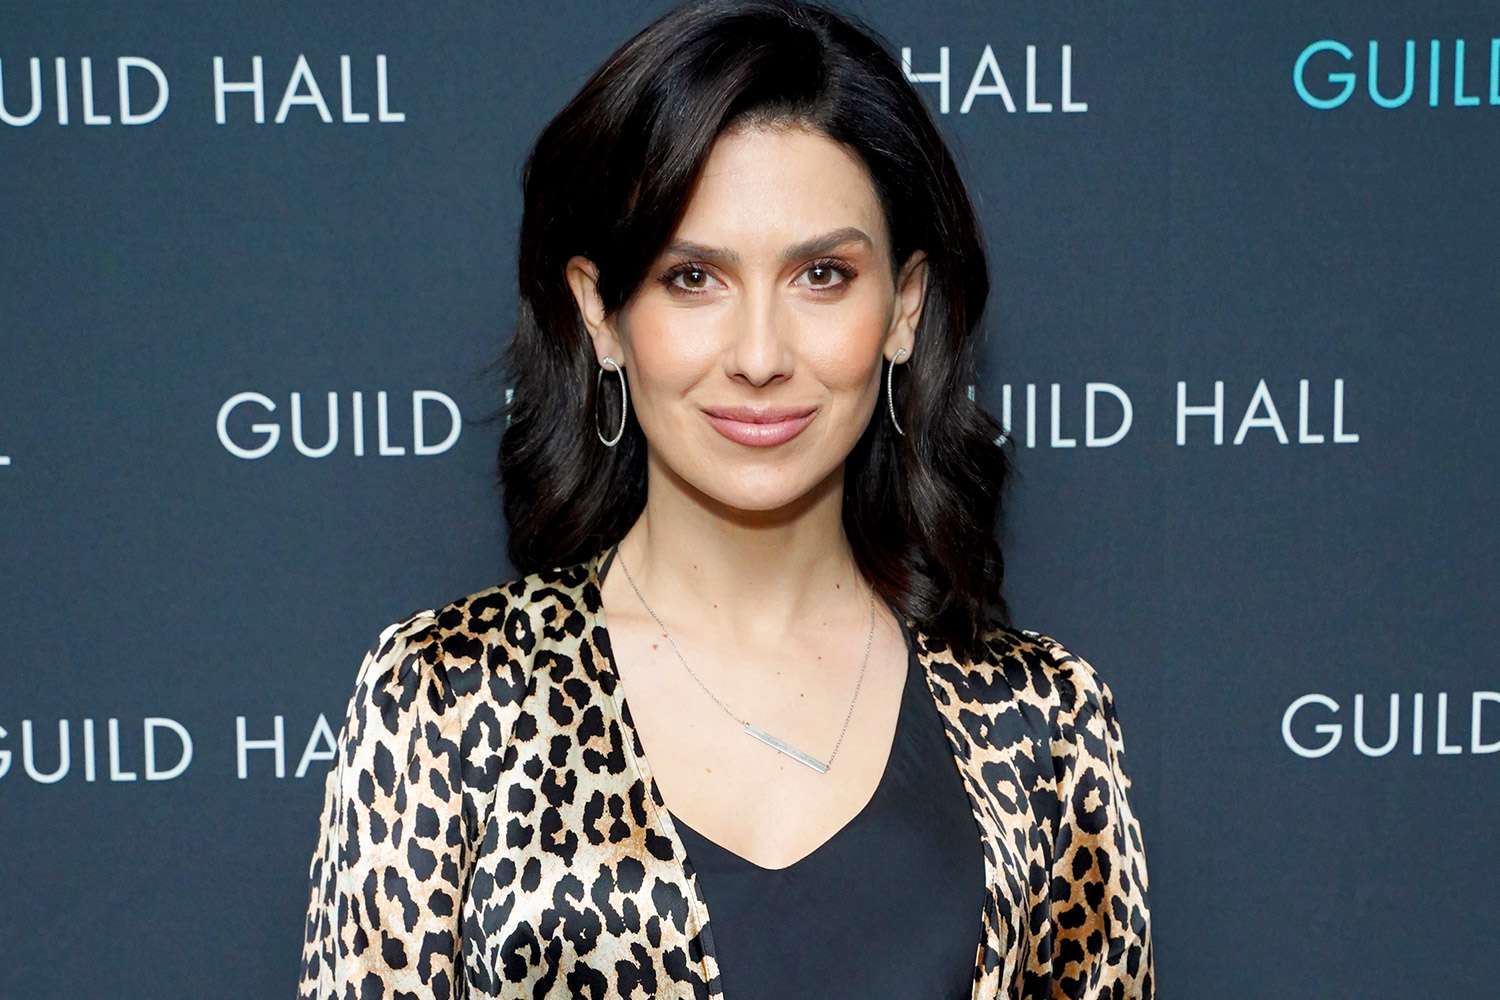 Hilaria Baldwin Says She’s Feeling ‘Nervous’ About Her Pregnancy